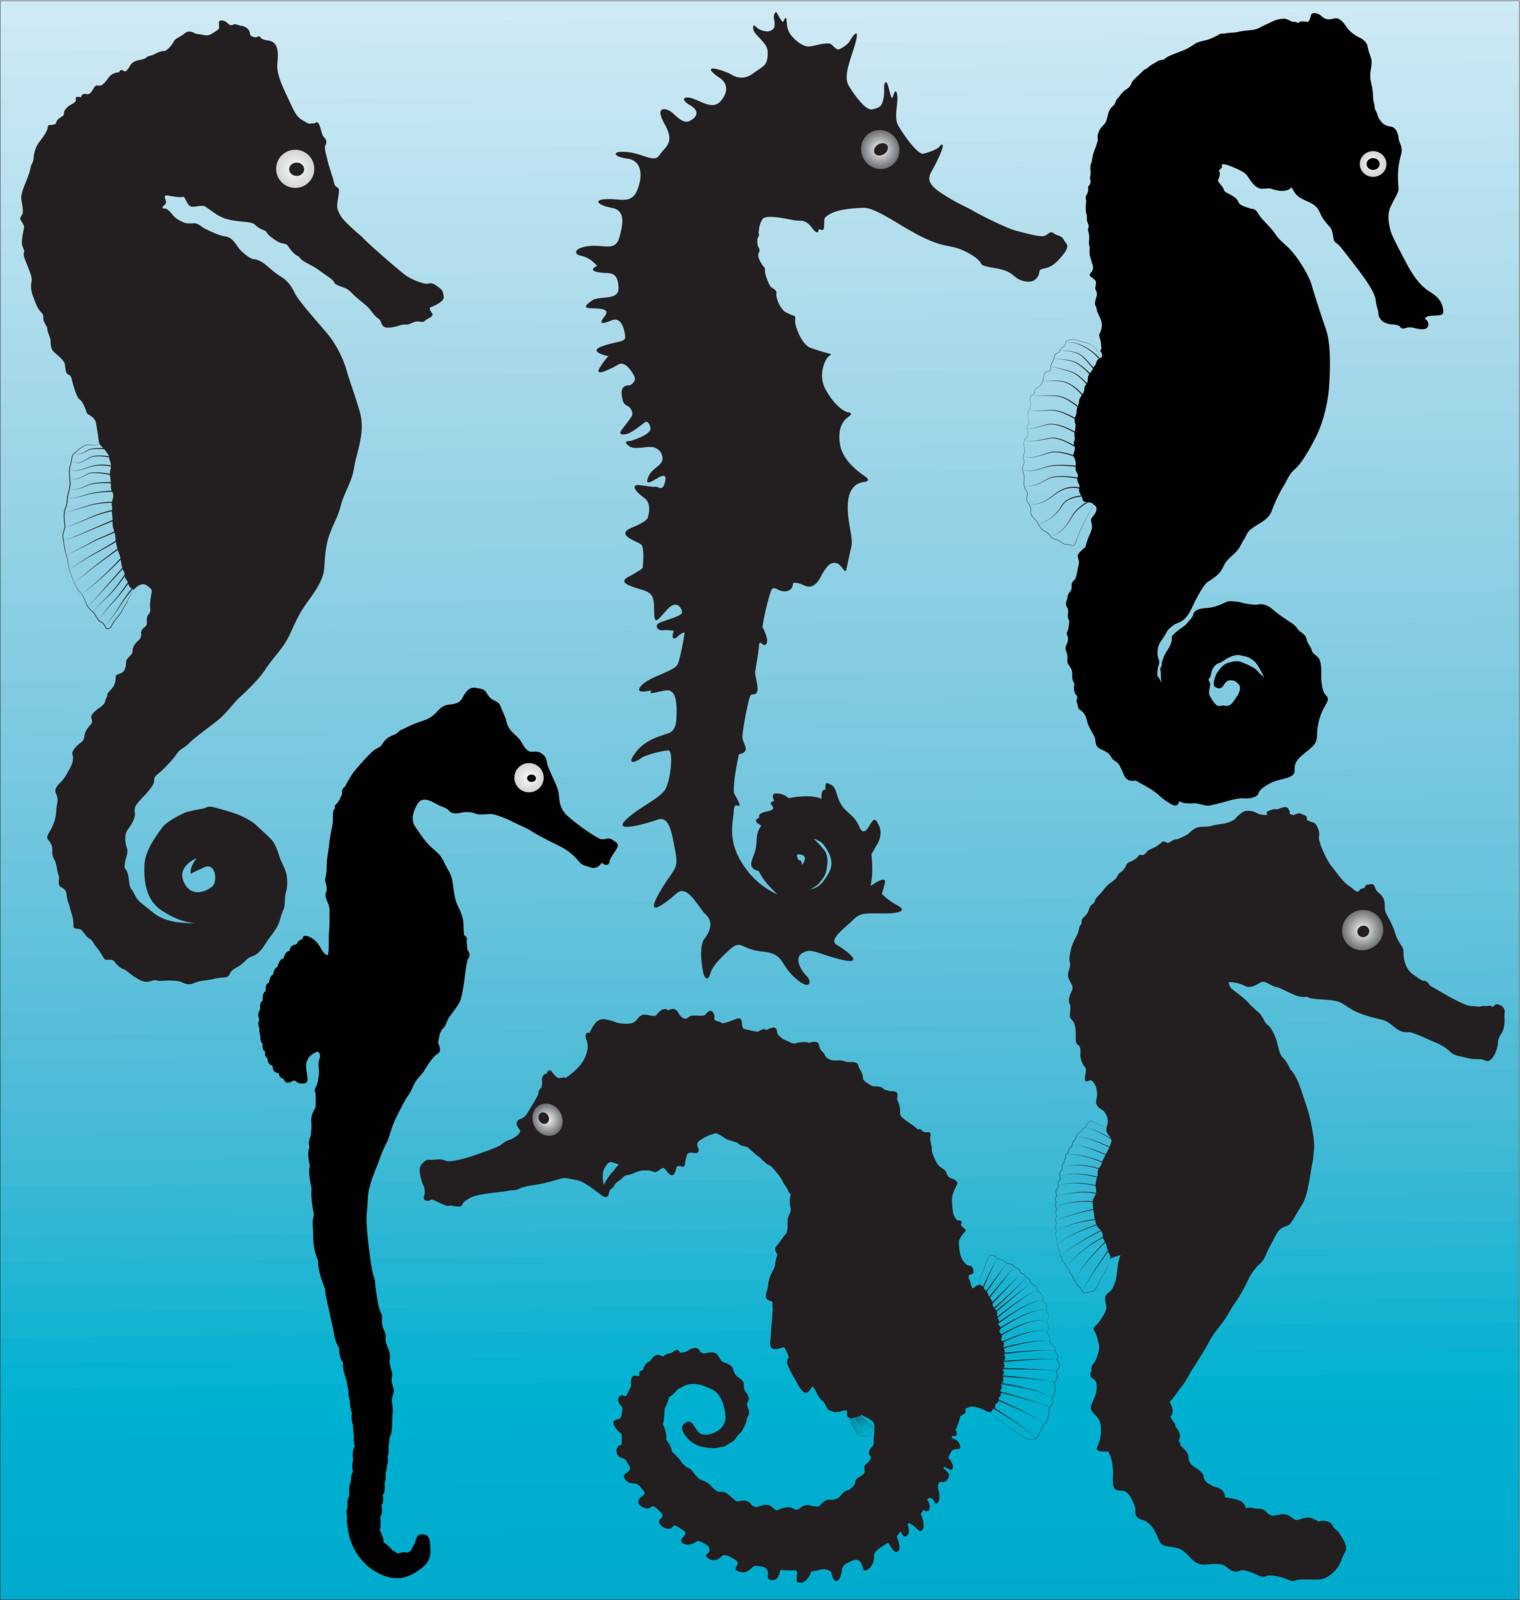 Seahorse vector silhouettes by only4denn